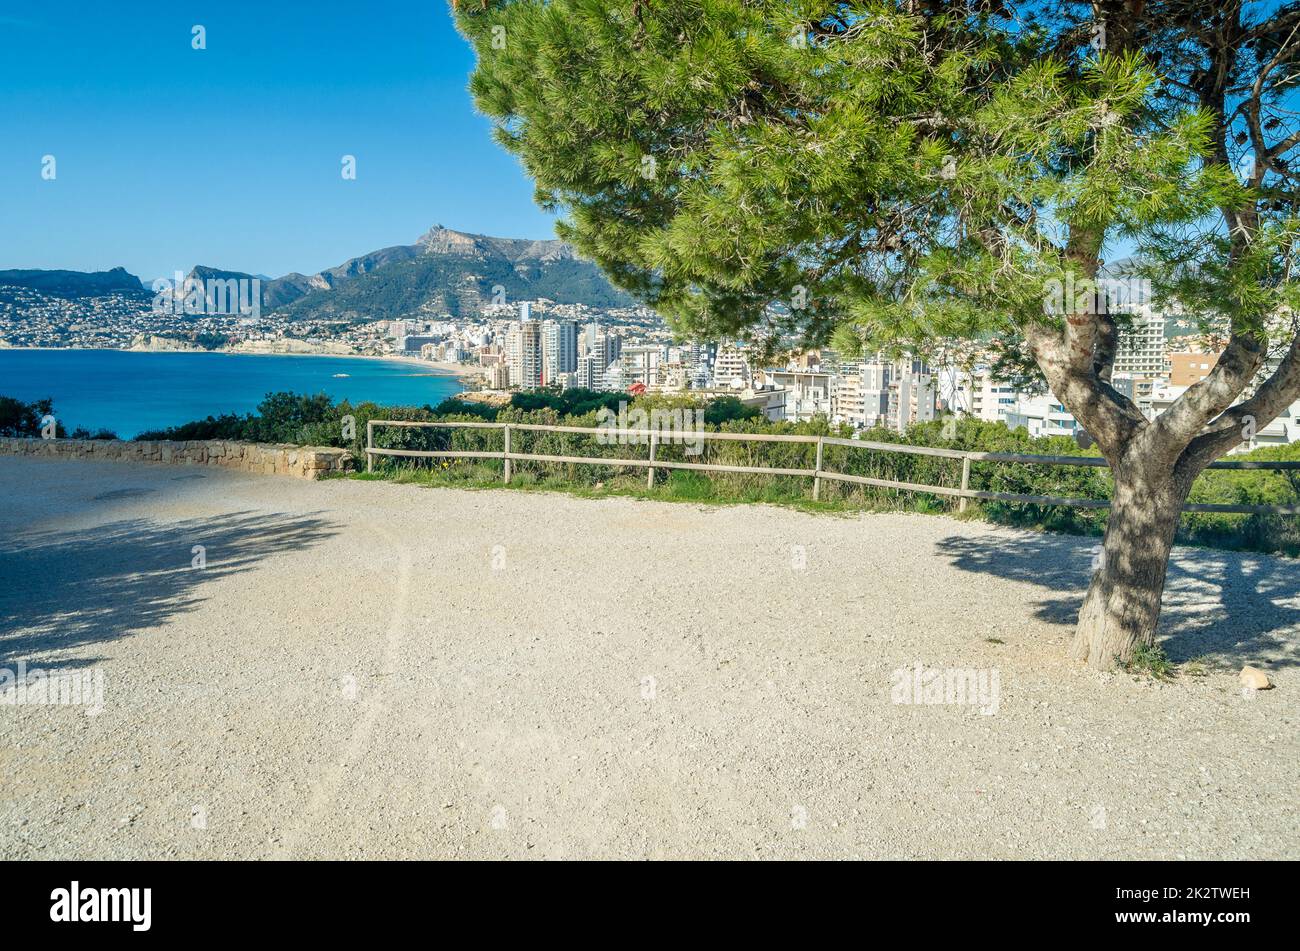 View from the Penon de Ifach Natural Park in Calpe, Alicante province, Valencian Community, Spain Stock Photo